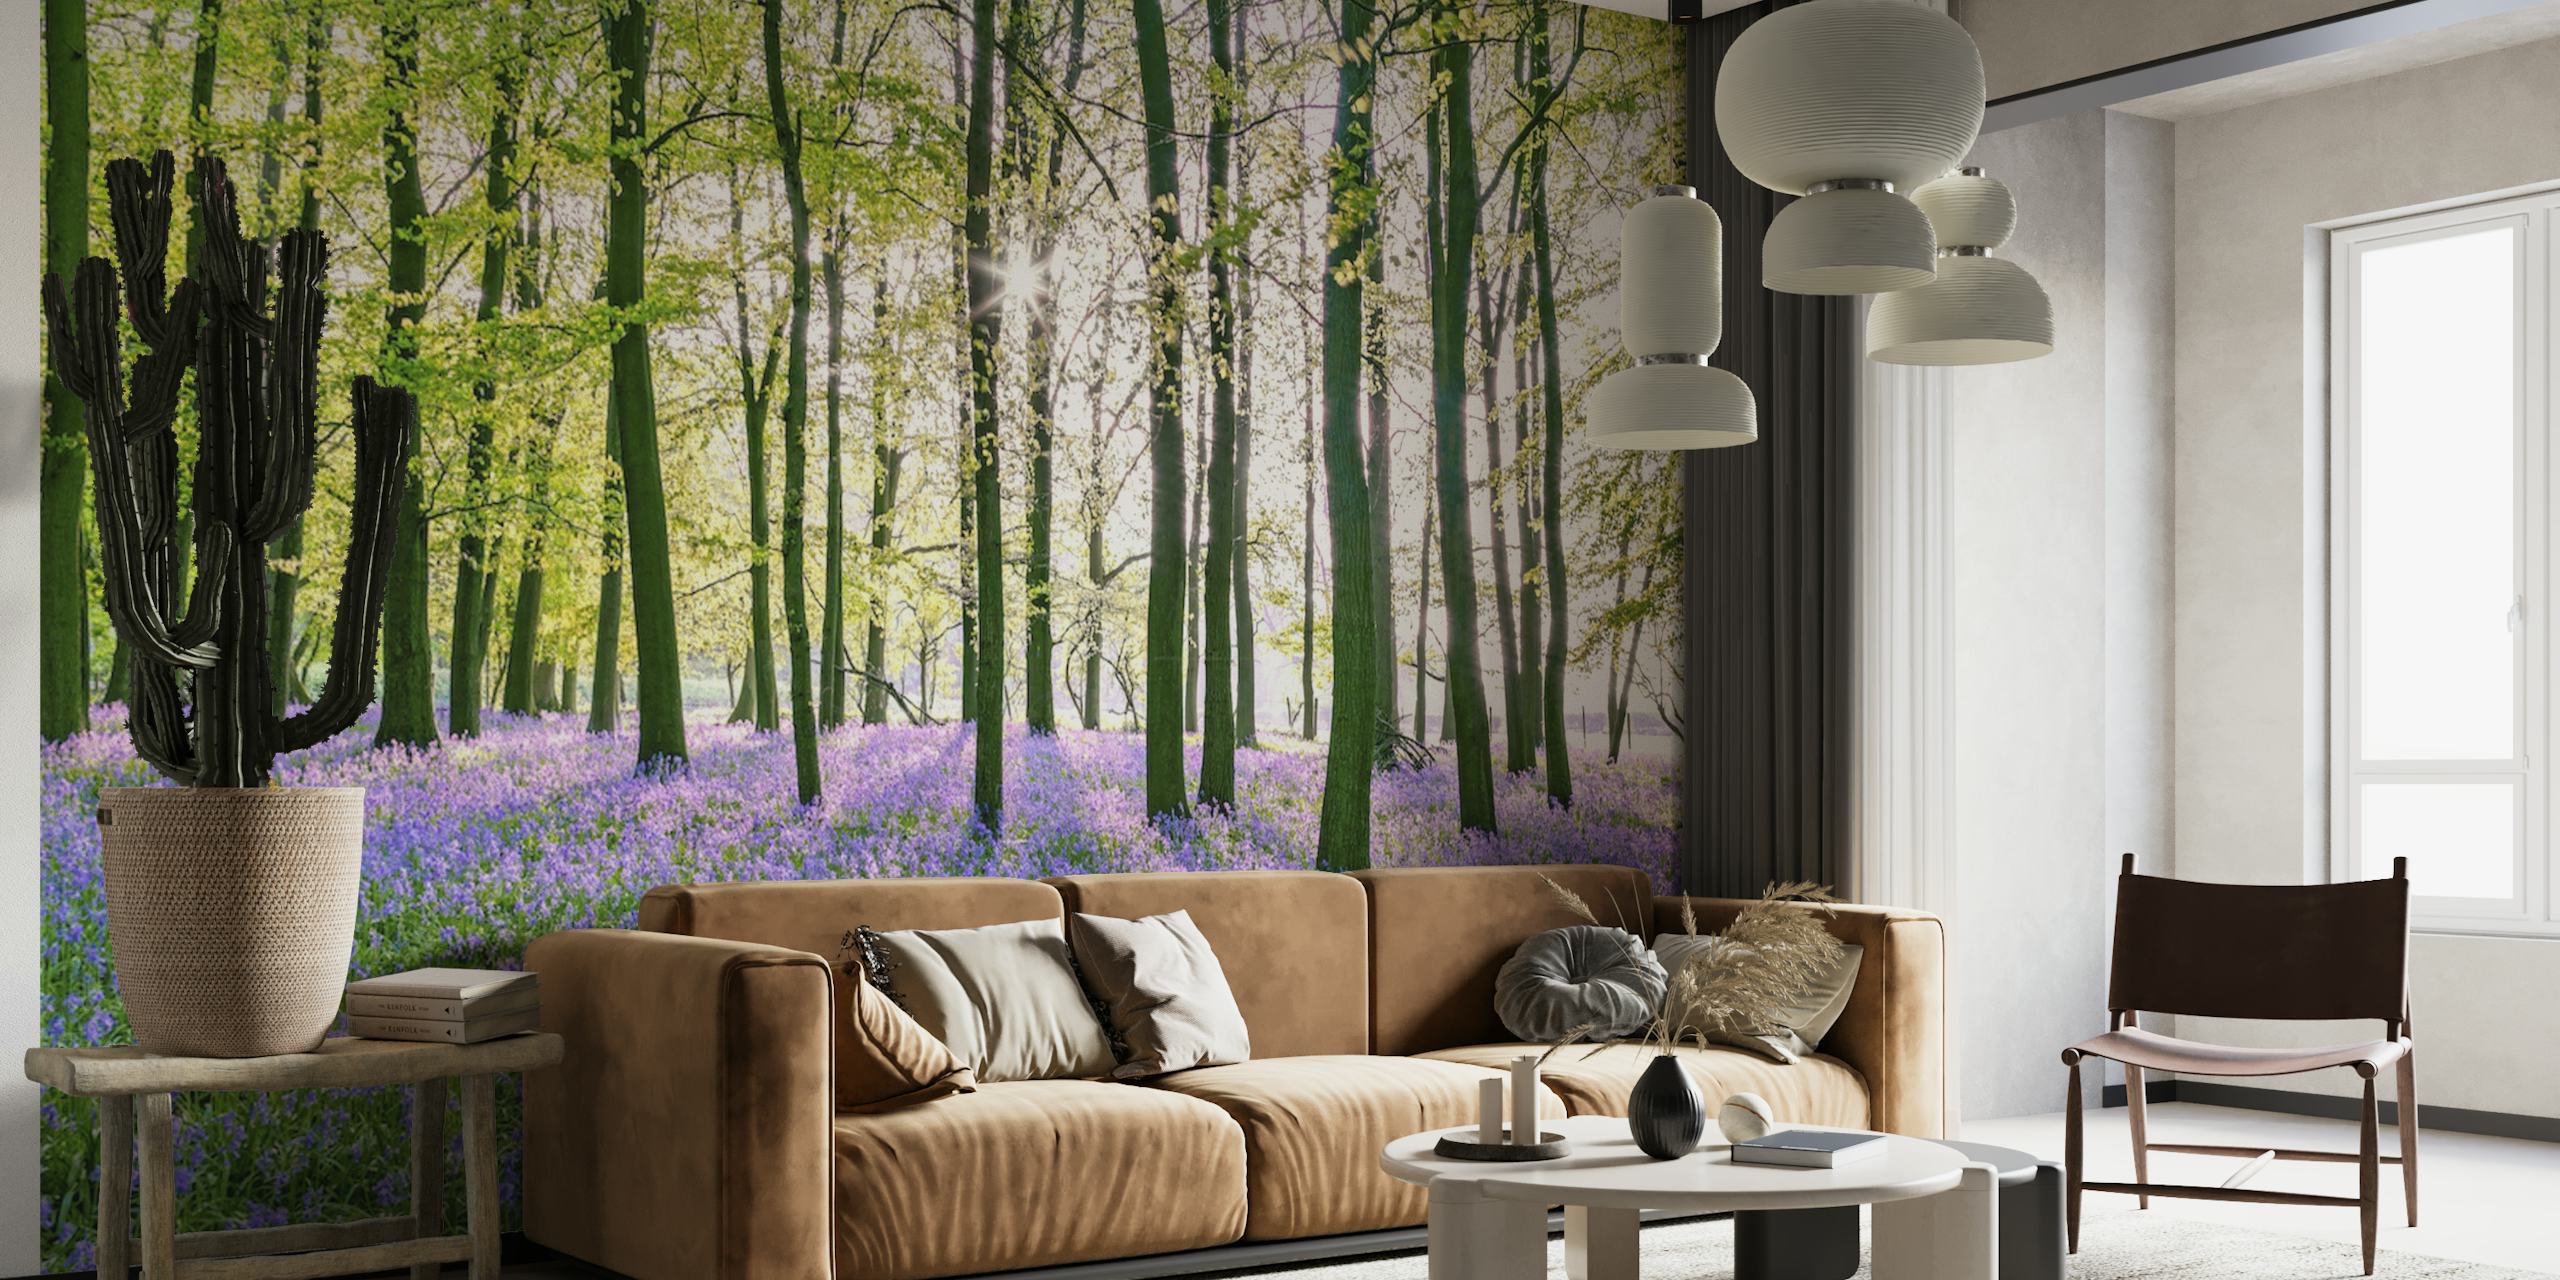 A serene bluebell forest wall mural with a lush green canopy and vibrant purple flowers covering the forest floor.